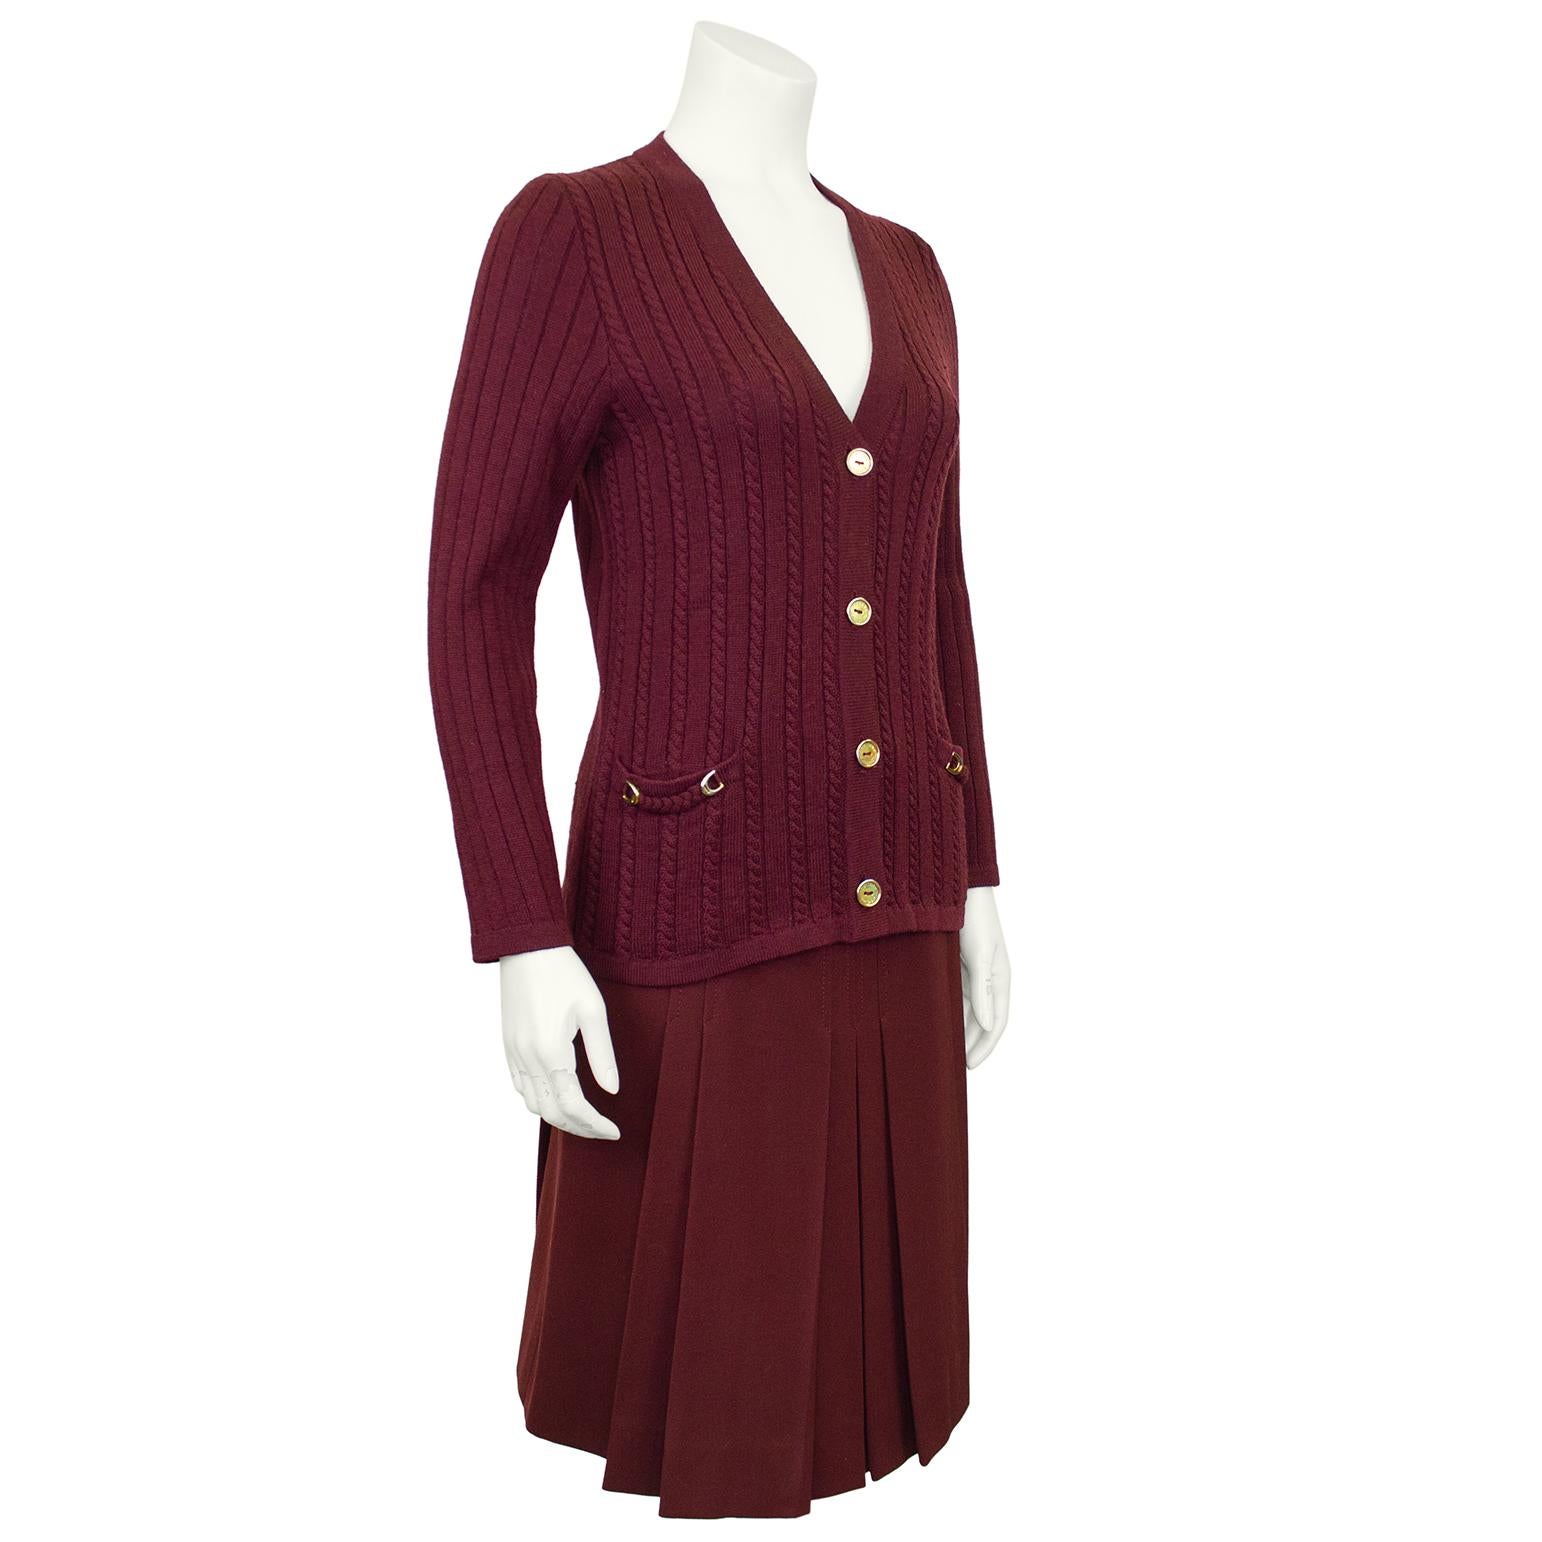 Classic French girl style, Celine 100% wool maroon cardigan and matching gabardine skirt ensemble from the 1970's. The set features a cable knit cardigan with braided trim at the pockets with gold tone horse shoe details. The pleated skirt is high